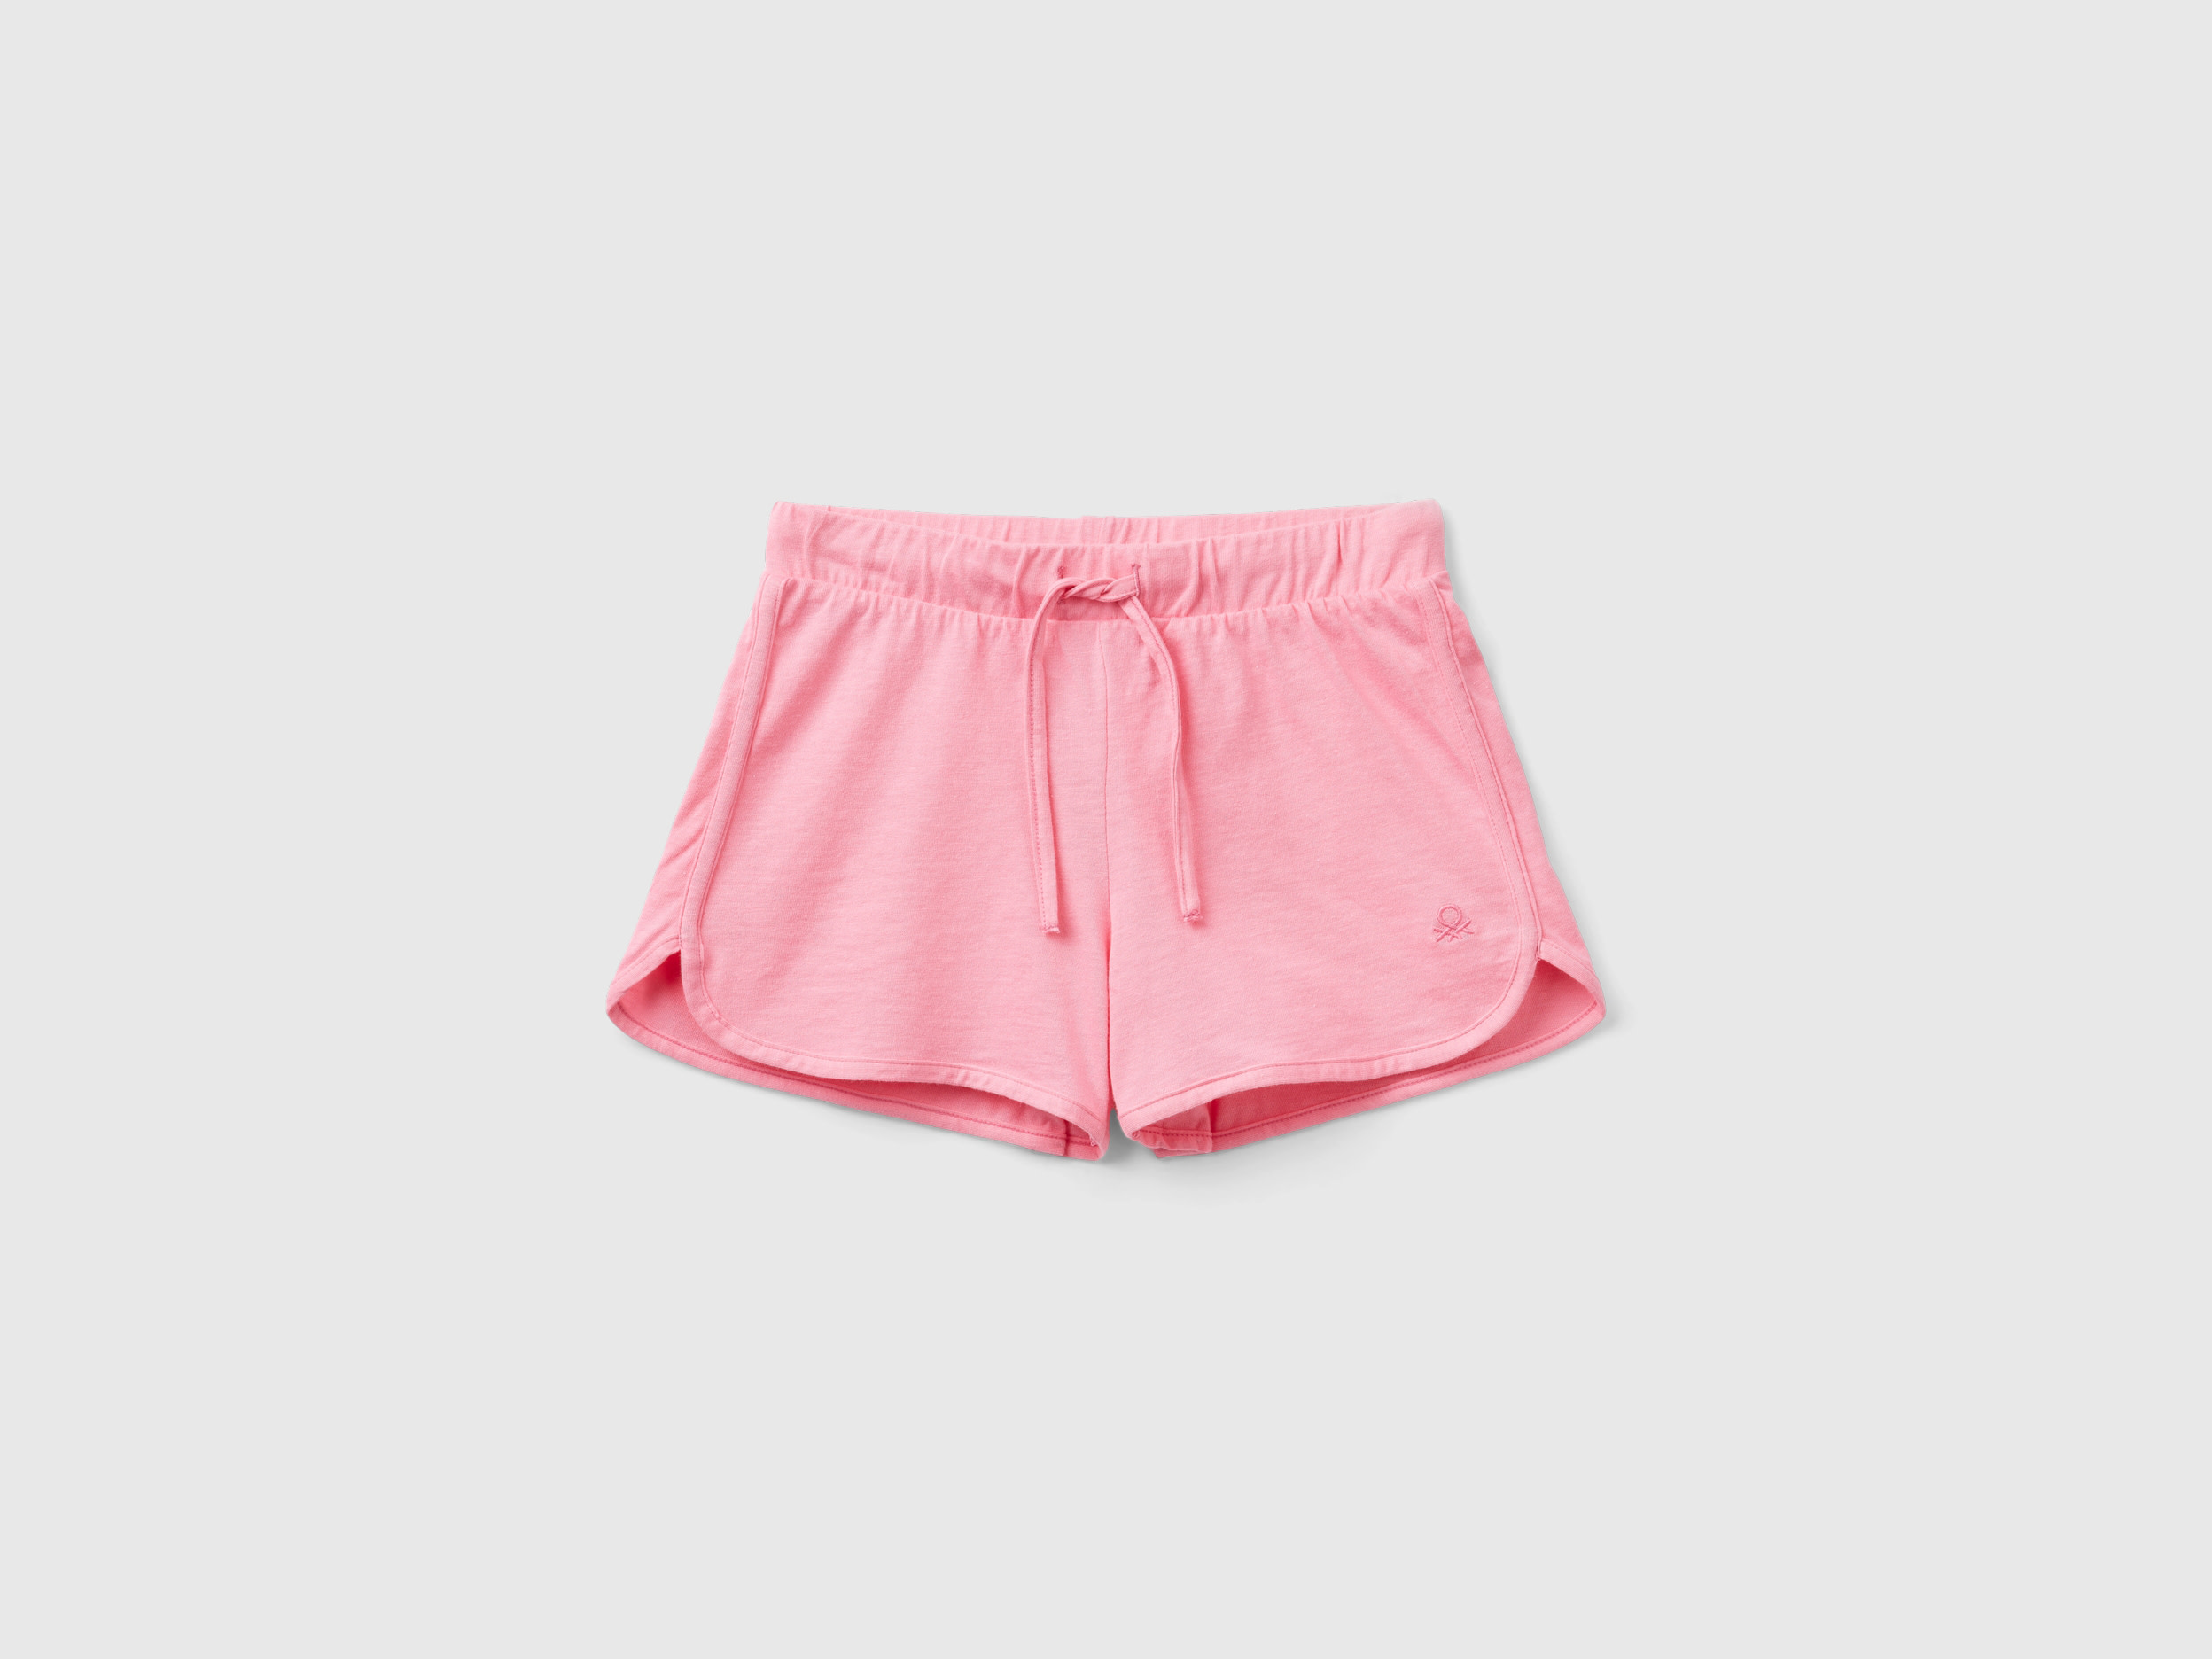 Image of Benetton, Runner Style Shorts In Organic Cotton, size M, Pink, Kids